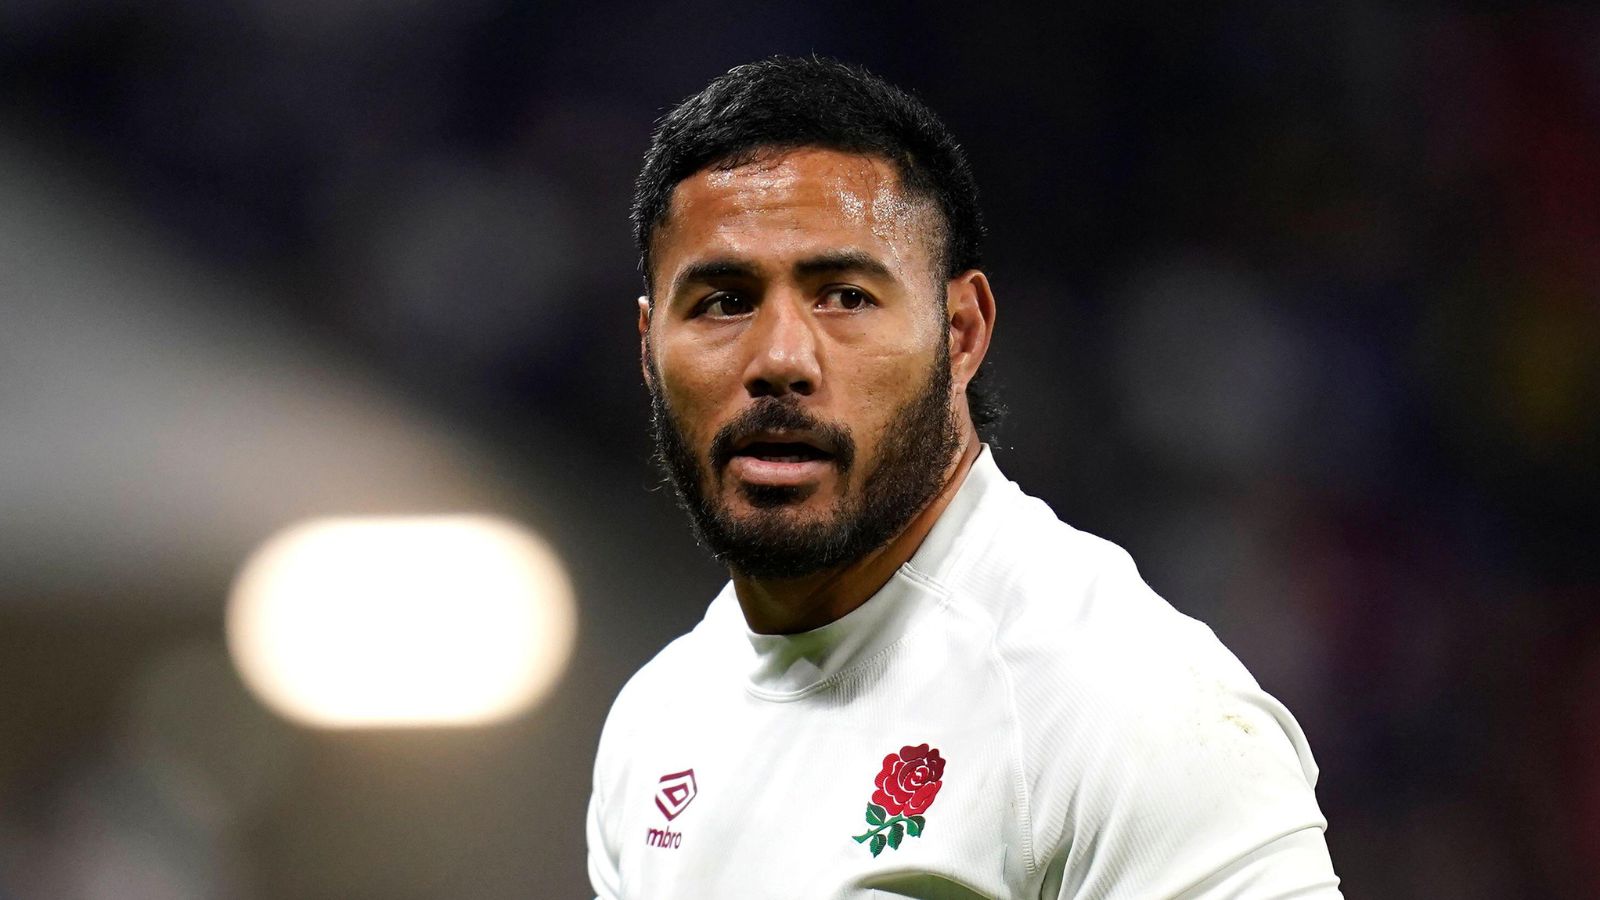 manu tuilagi comments on england’s overseas players policy ahead of french move